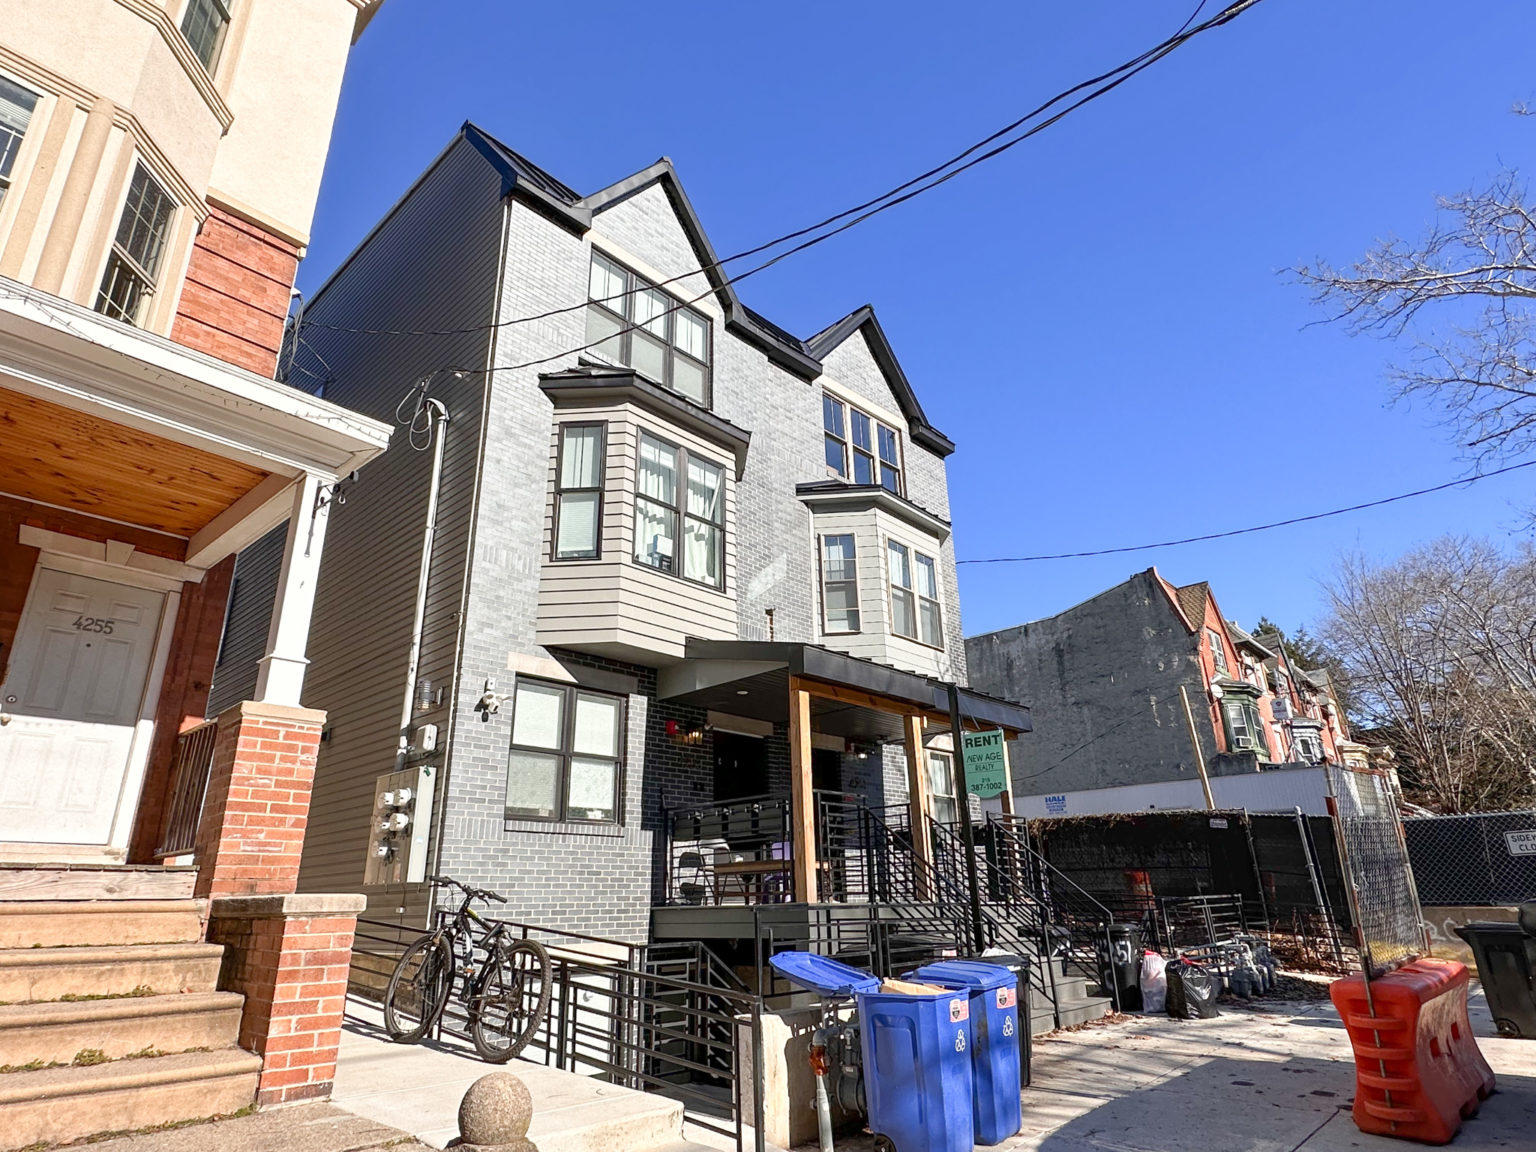 Construction Complete at 4251 Sansom Street in Spruce Hill, West